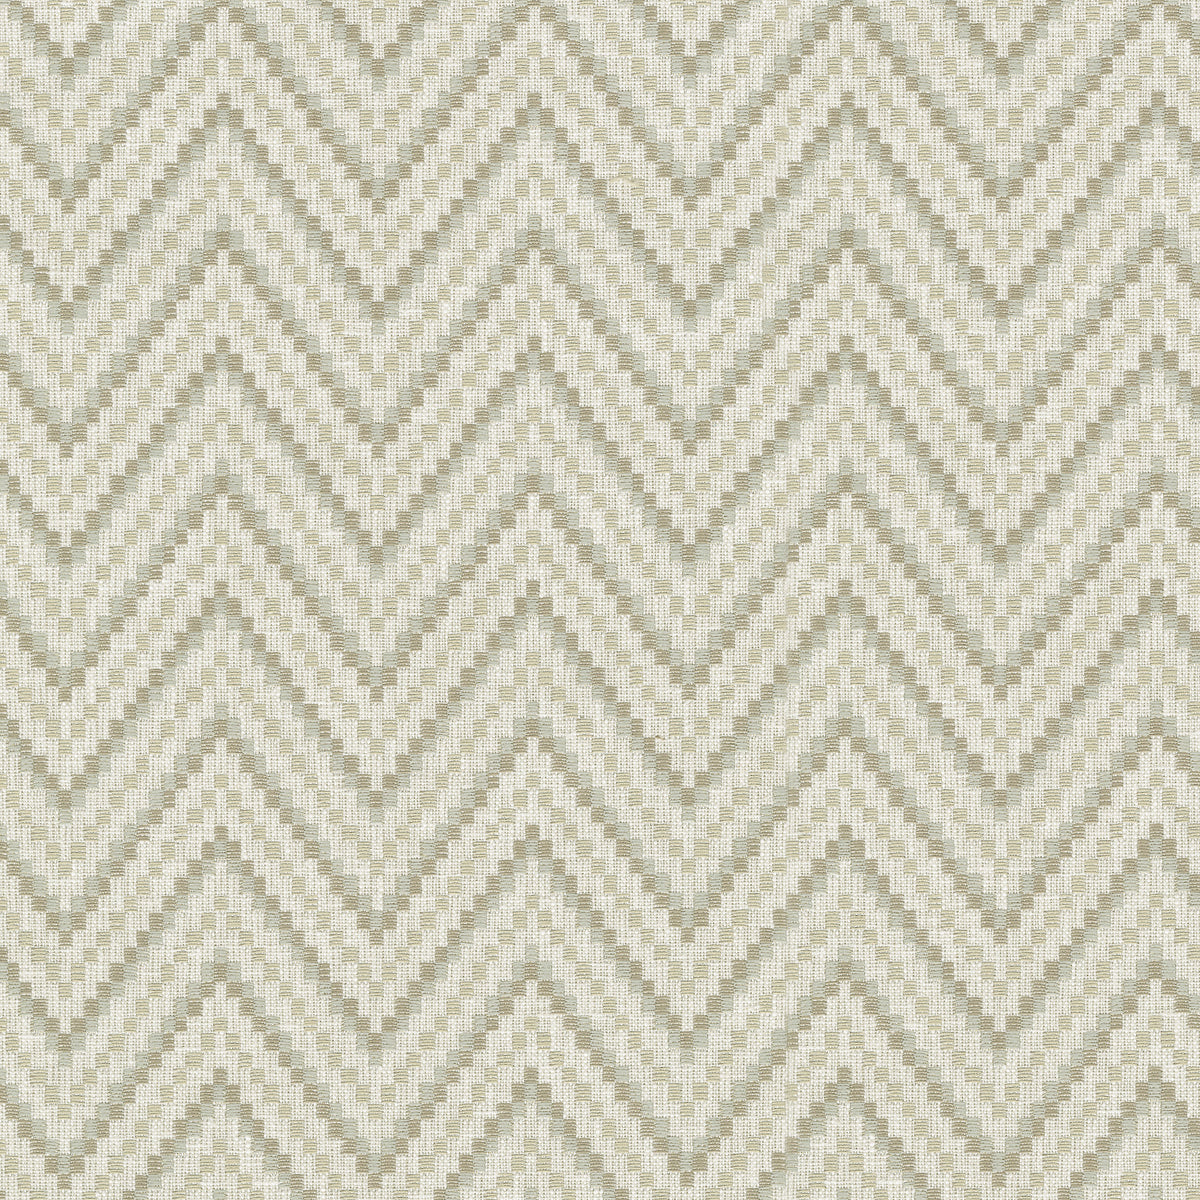 P/K Lifestyles Chevy - Mineral 412433 Fabric Swatch